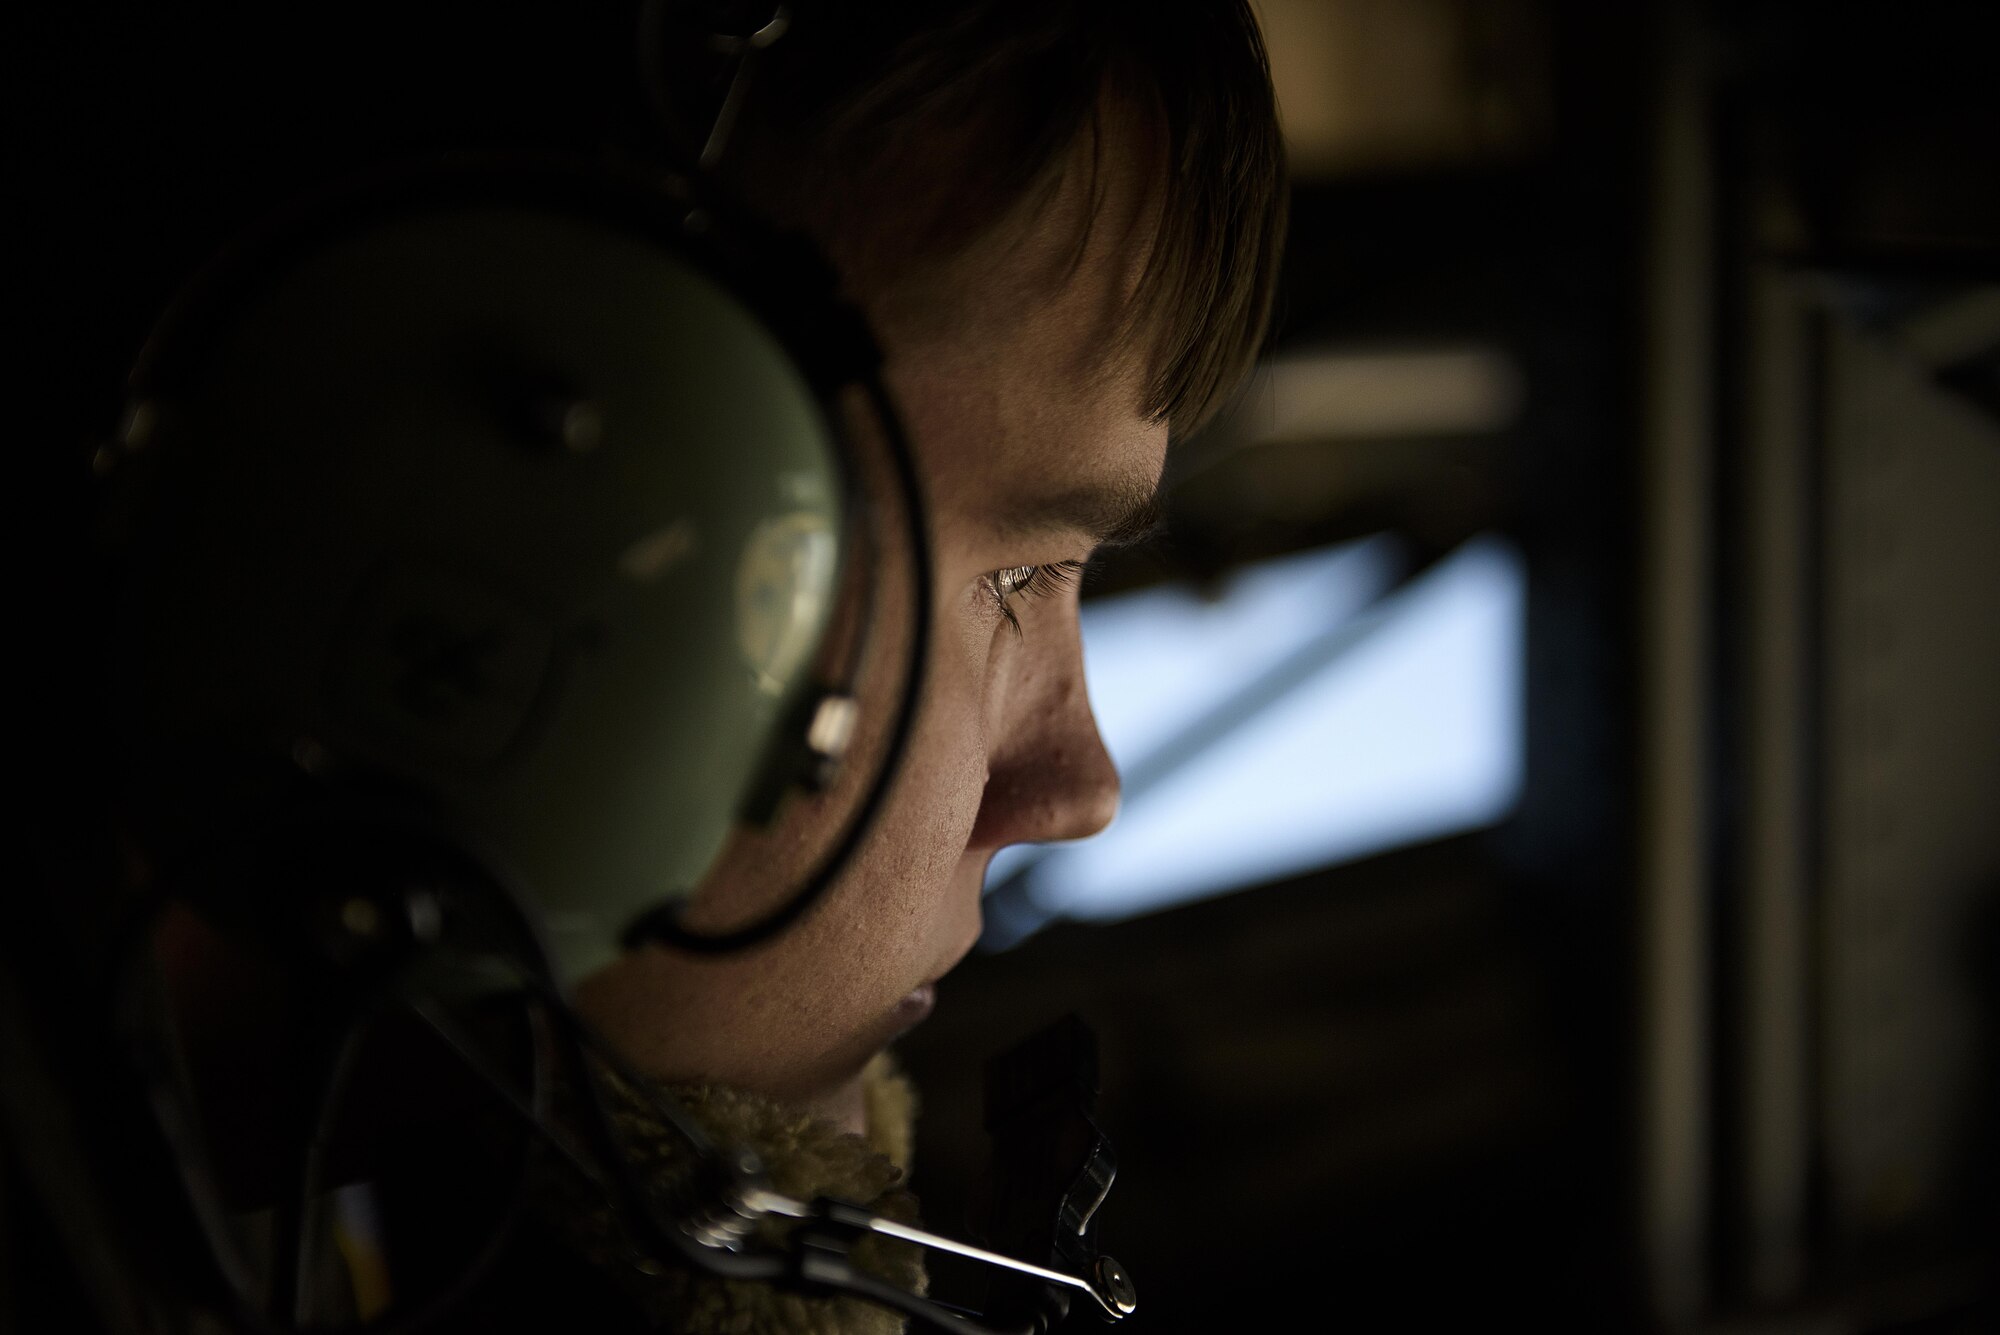 Senior Airman Jordan Webber, a KC-135 Stratotanker boom operator from MacDill Air Force Base, refuels an F-22 Raptor from Langley Air Force Base, Virginia during a mission for exercise Red Flag at Nellis Air Force Base, Nevada July 18, 2015 during exercise Red Flag. Red Flag 16-3 is one of four Red Flag exercises at Nellis--this edition of Red Flag focusing on multi-domain operations in air, space and cyberspace. (U.S. Air Force photo/Tech. Sgt. David Salanitri)